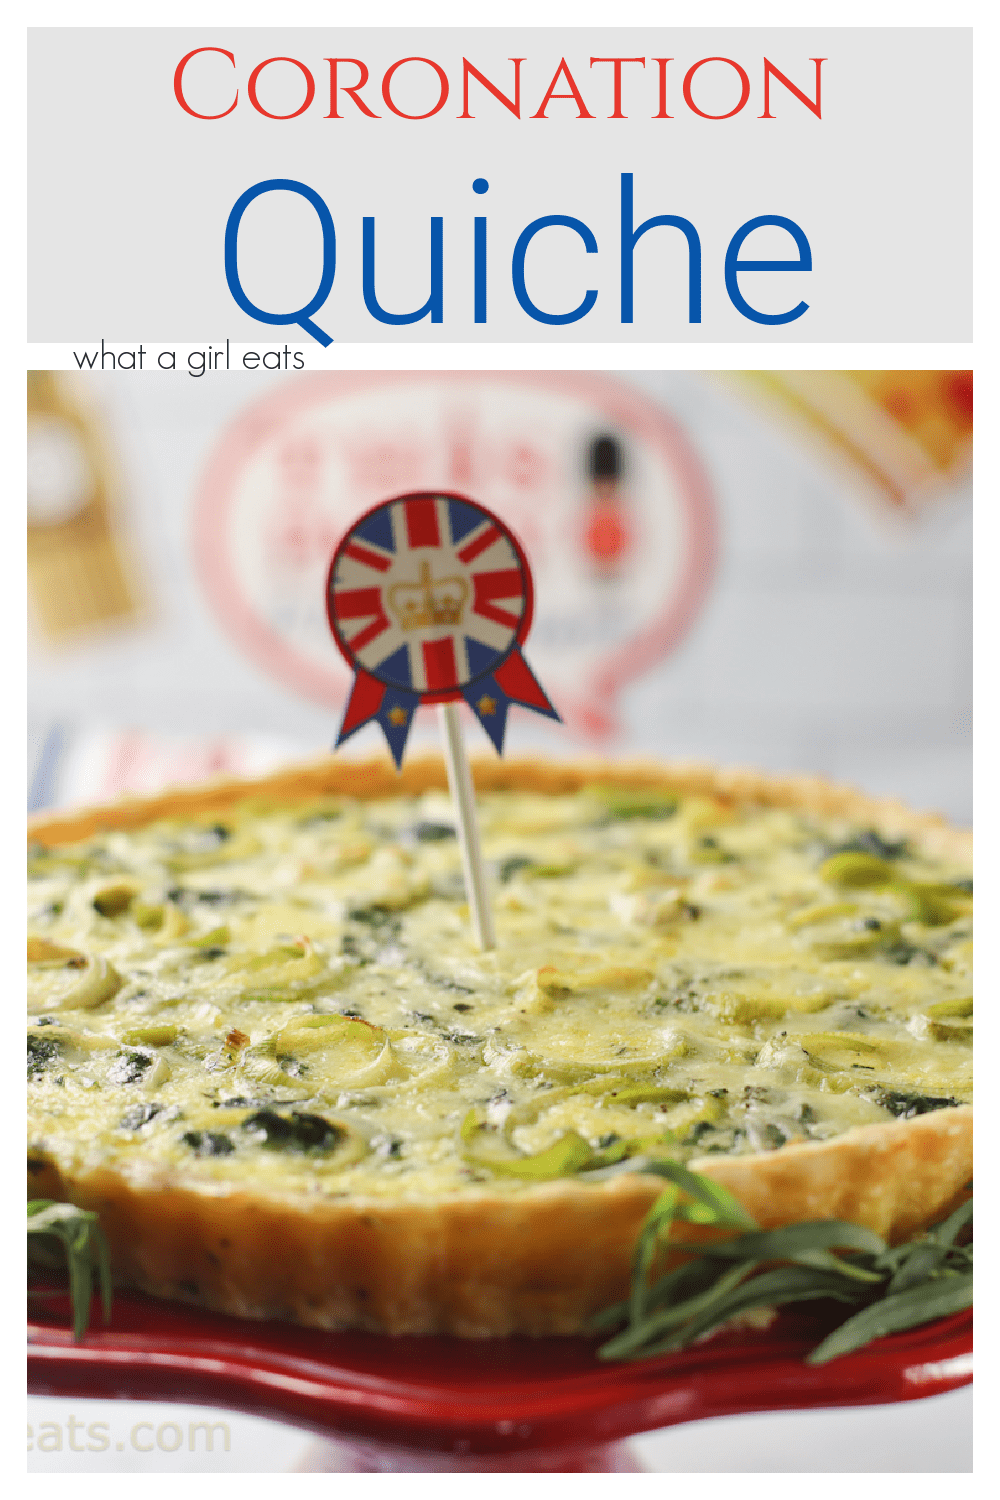 Coronation quiche from the kitchens of Buckingham Palace is perfect for watching the Coronation! Adapted for an American kitchen.